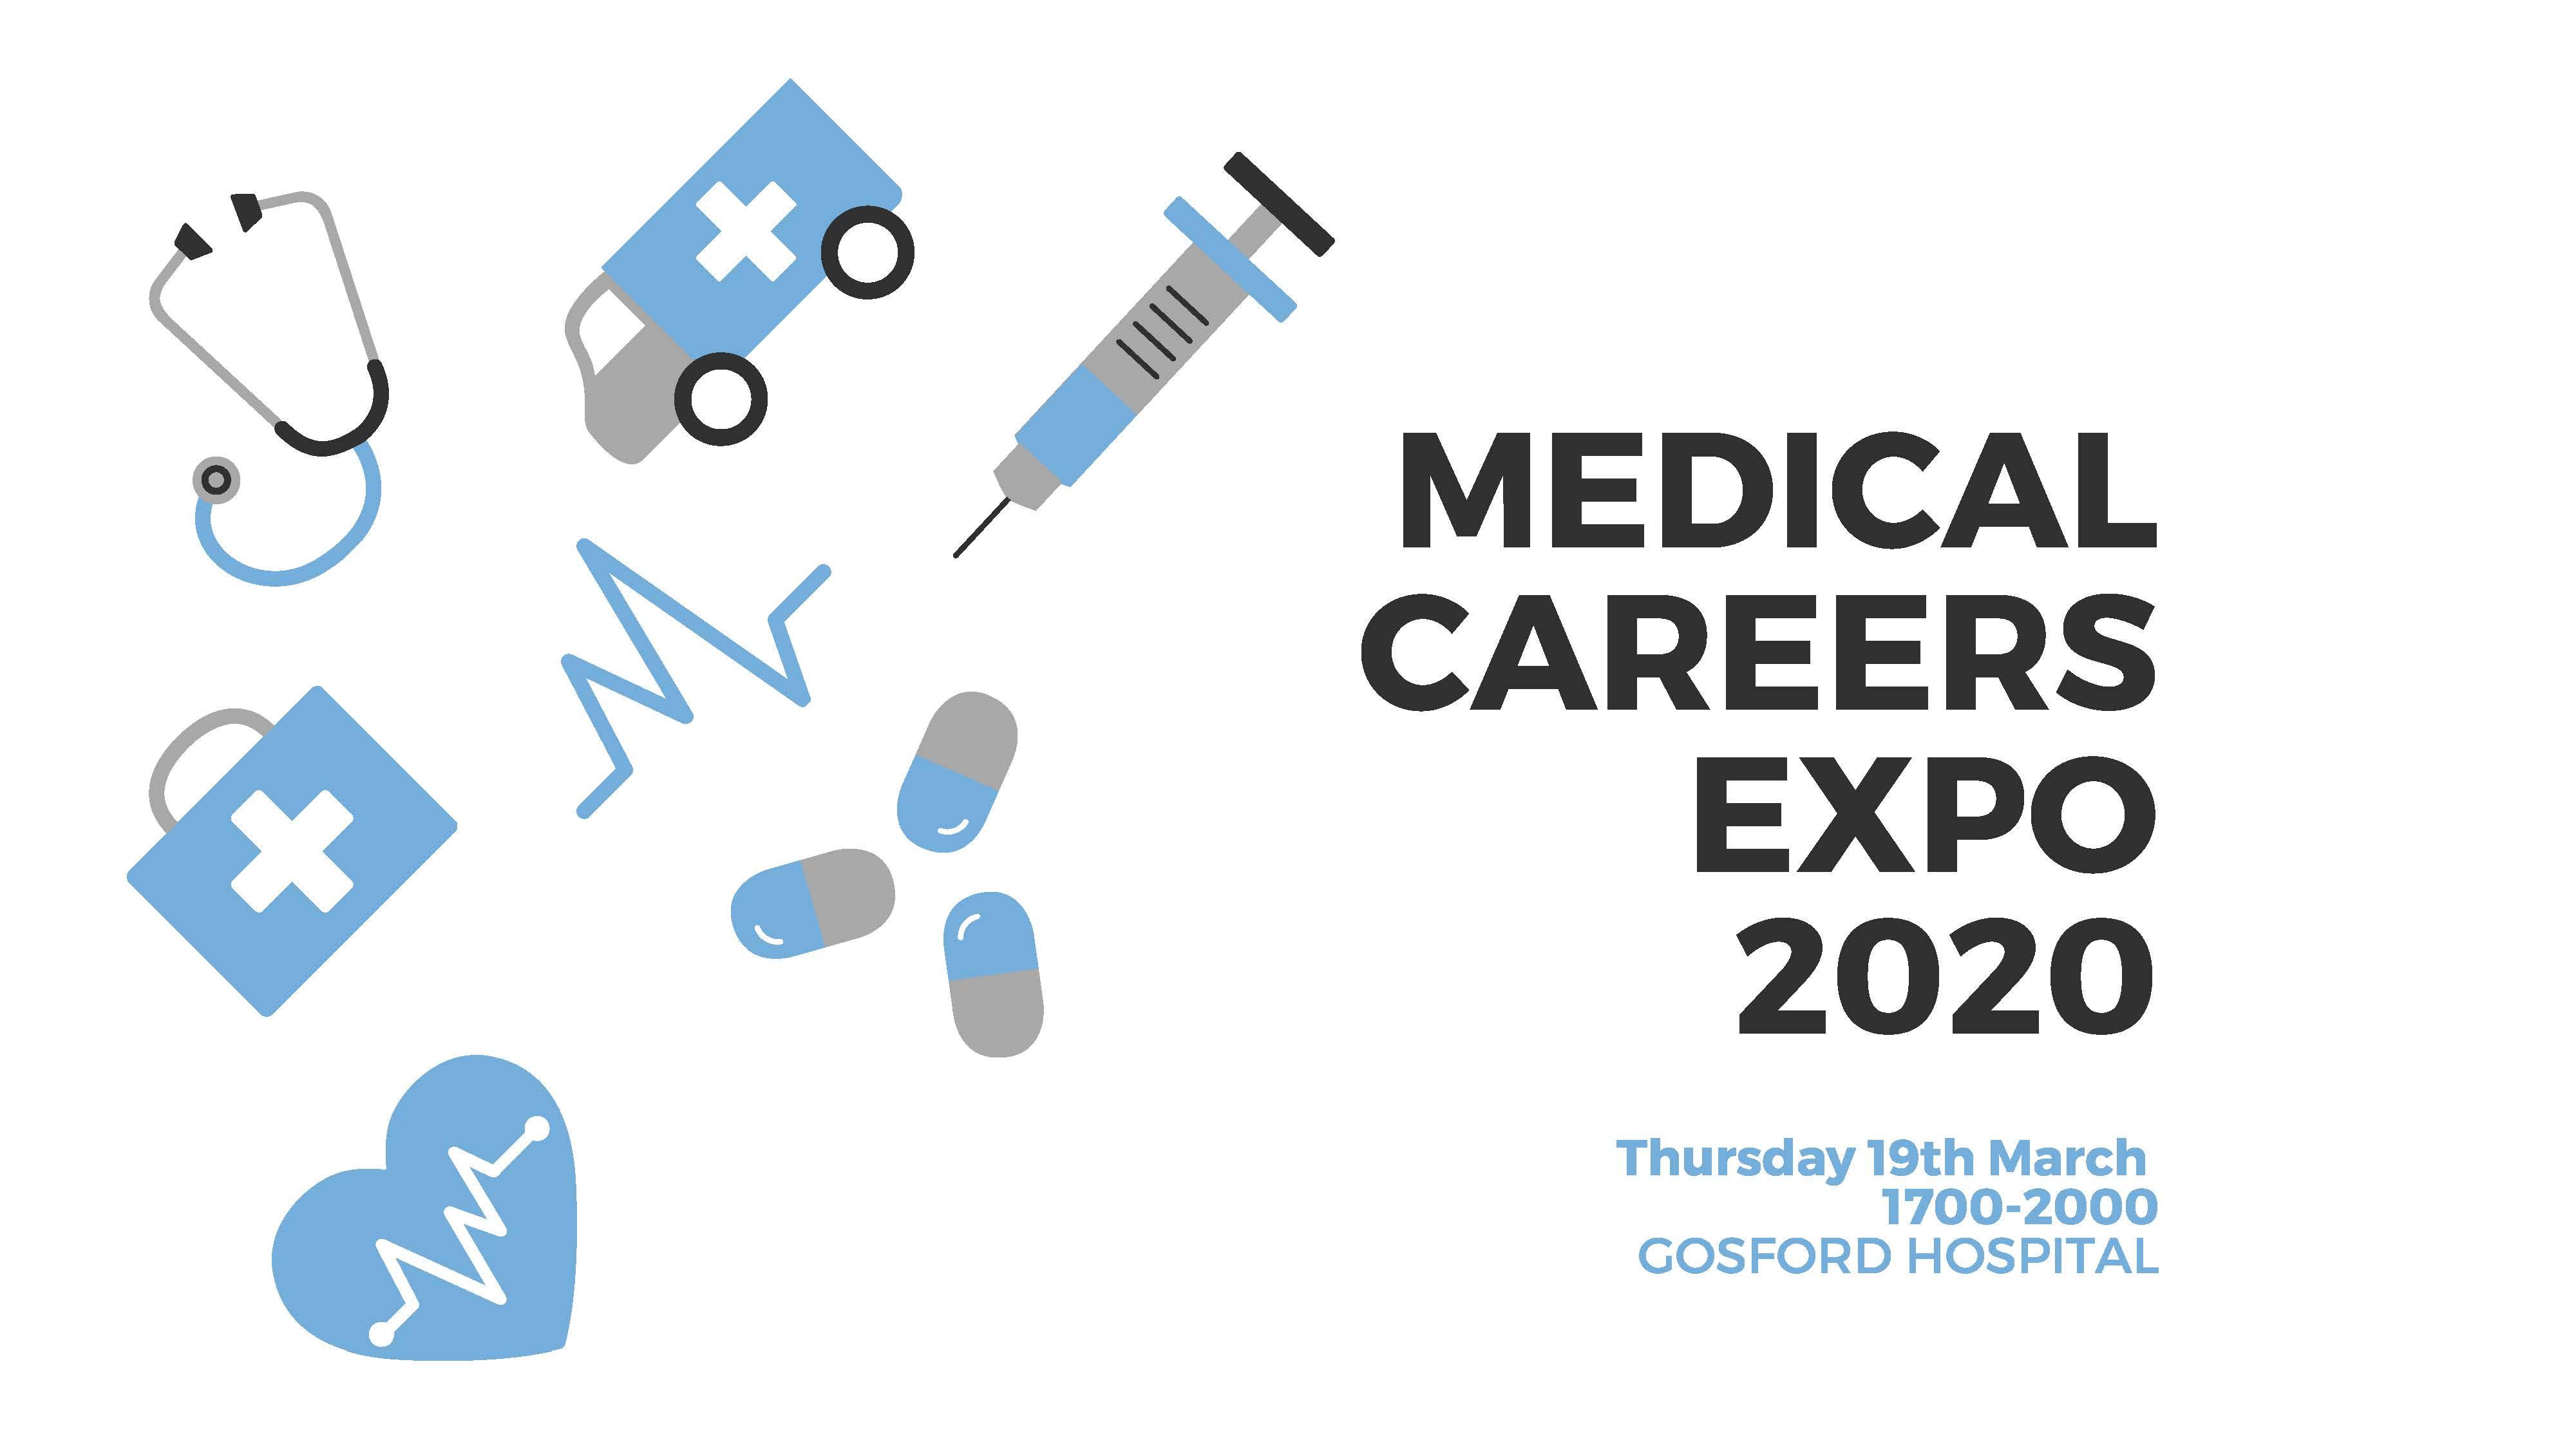 Medical Careers Expo 2020